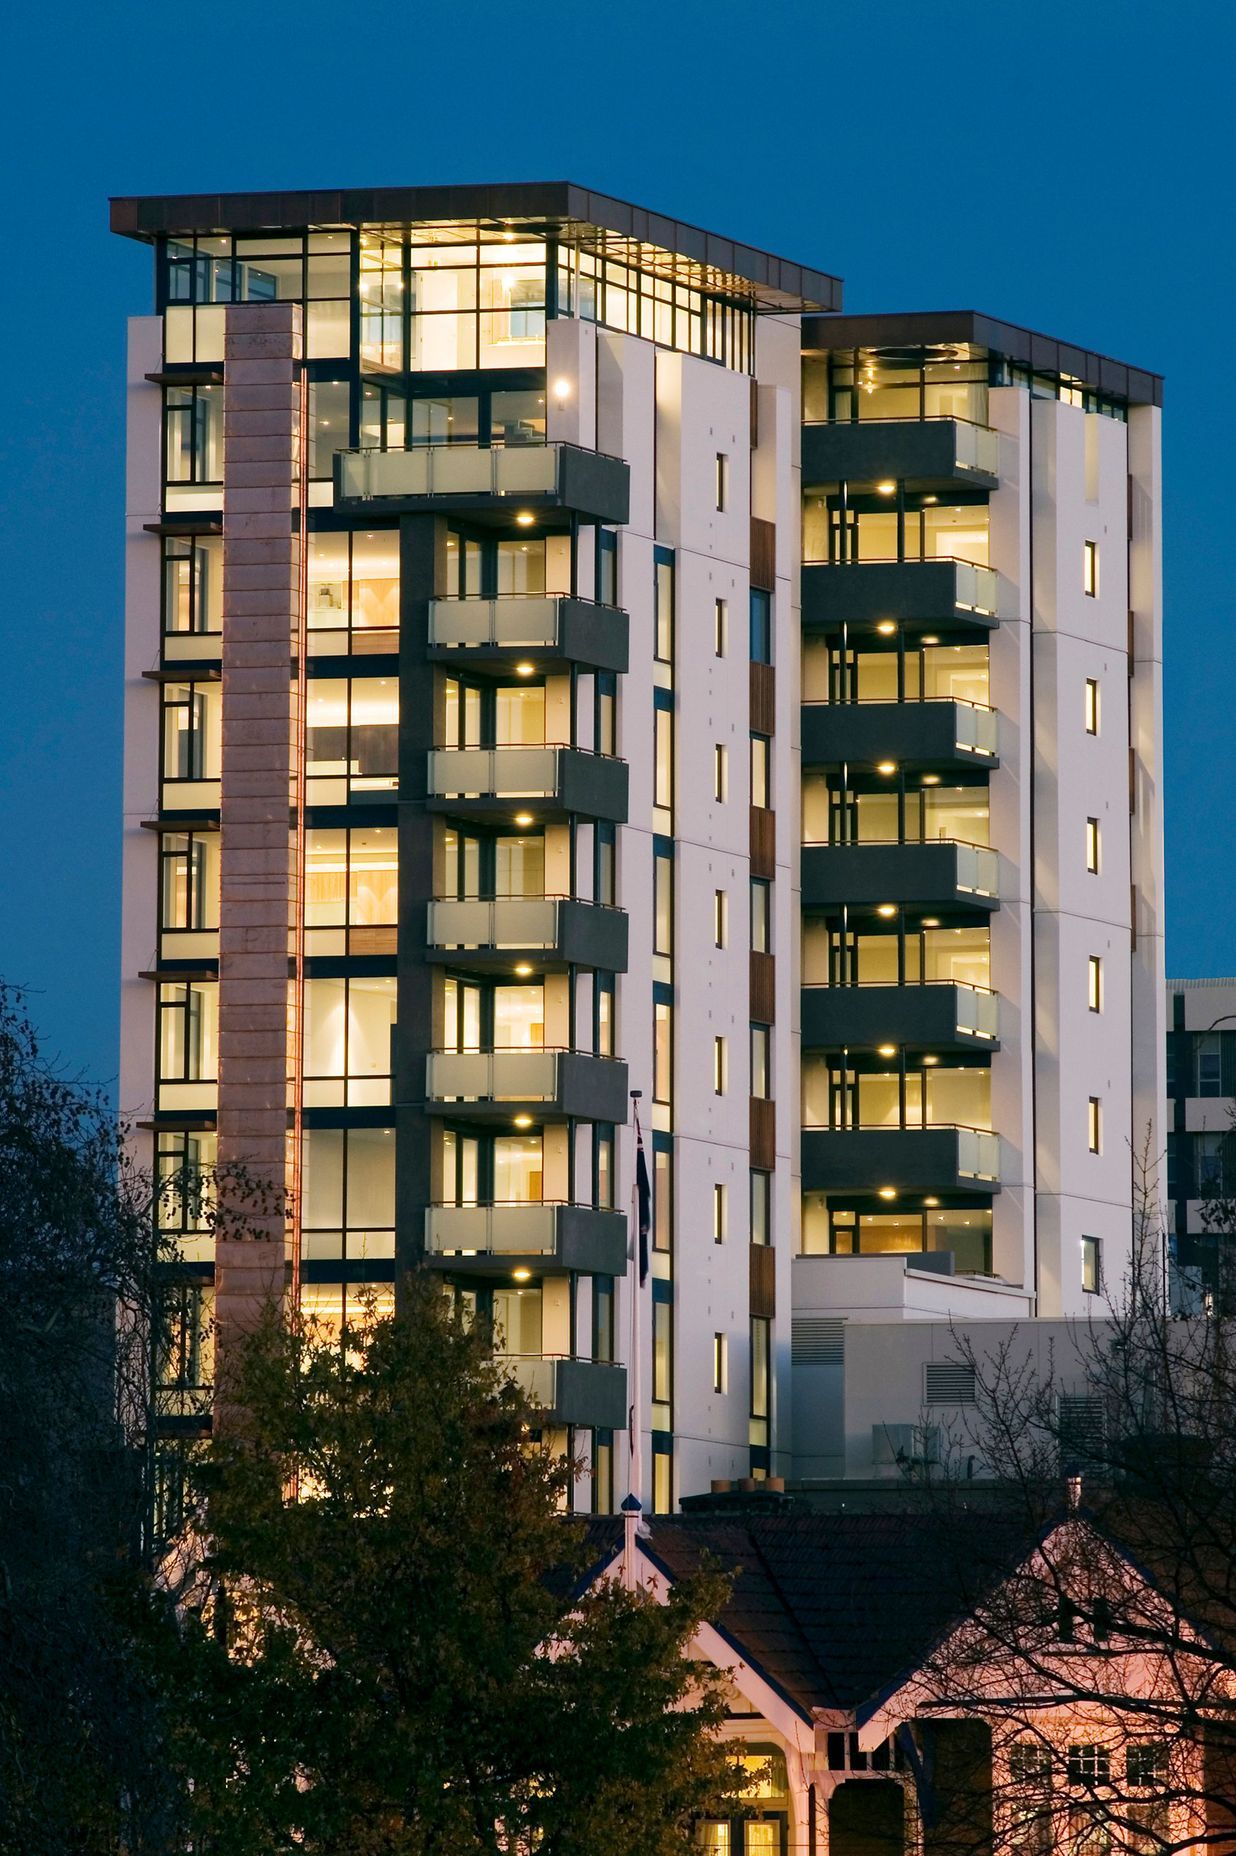 Gallery Apartments